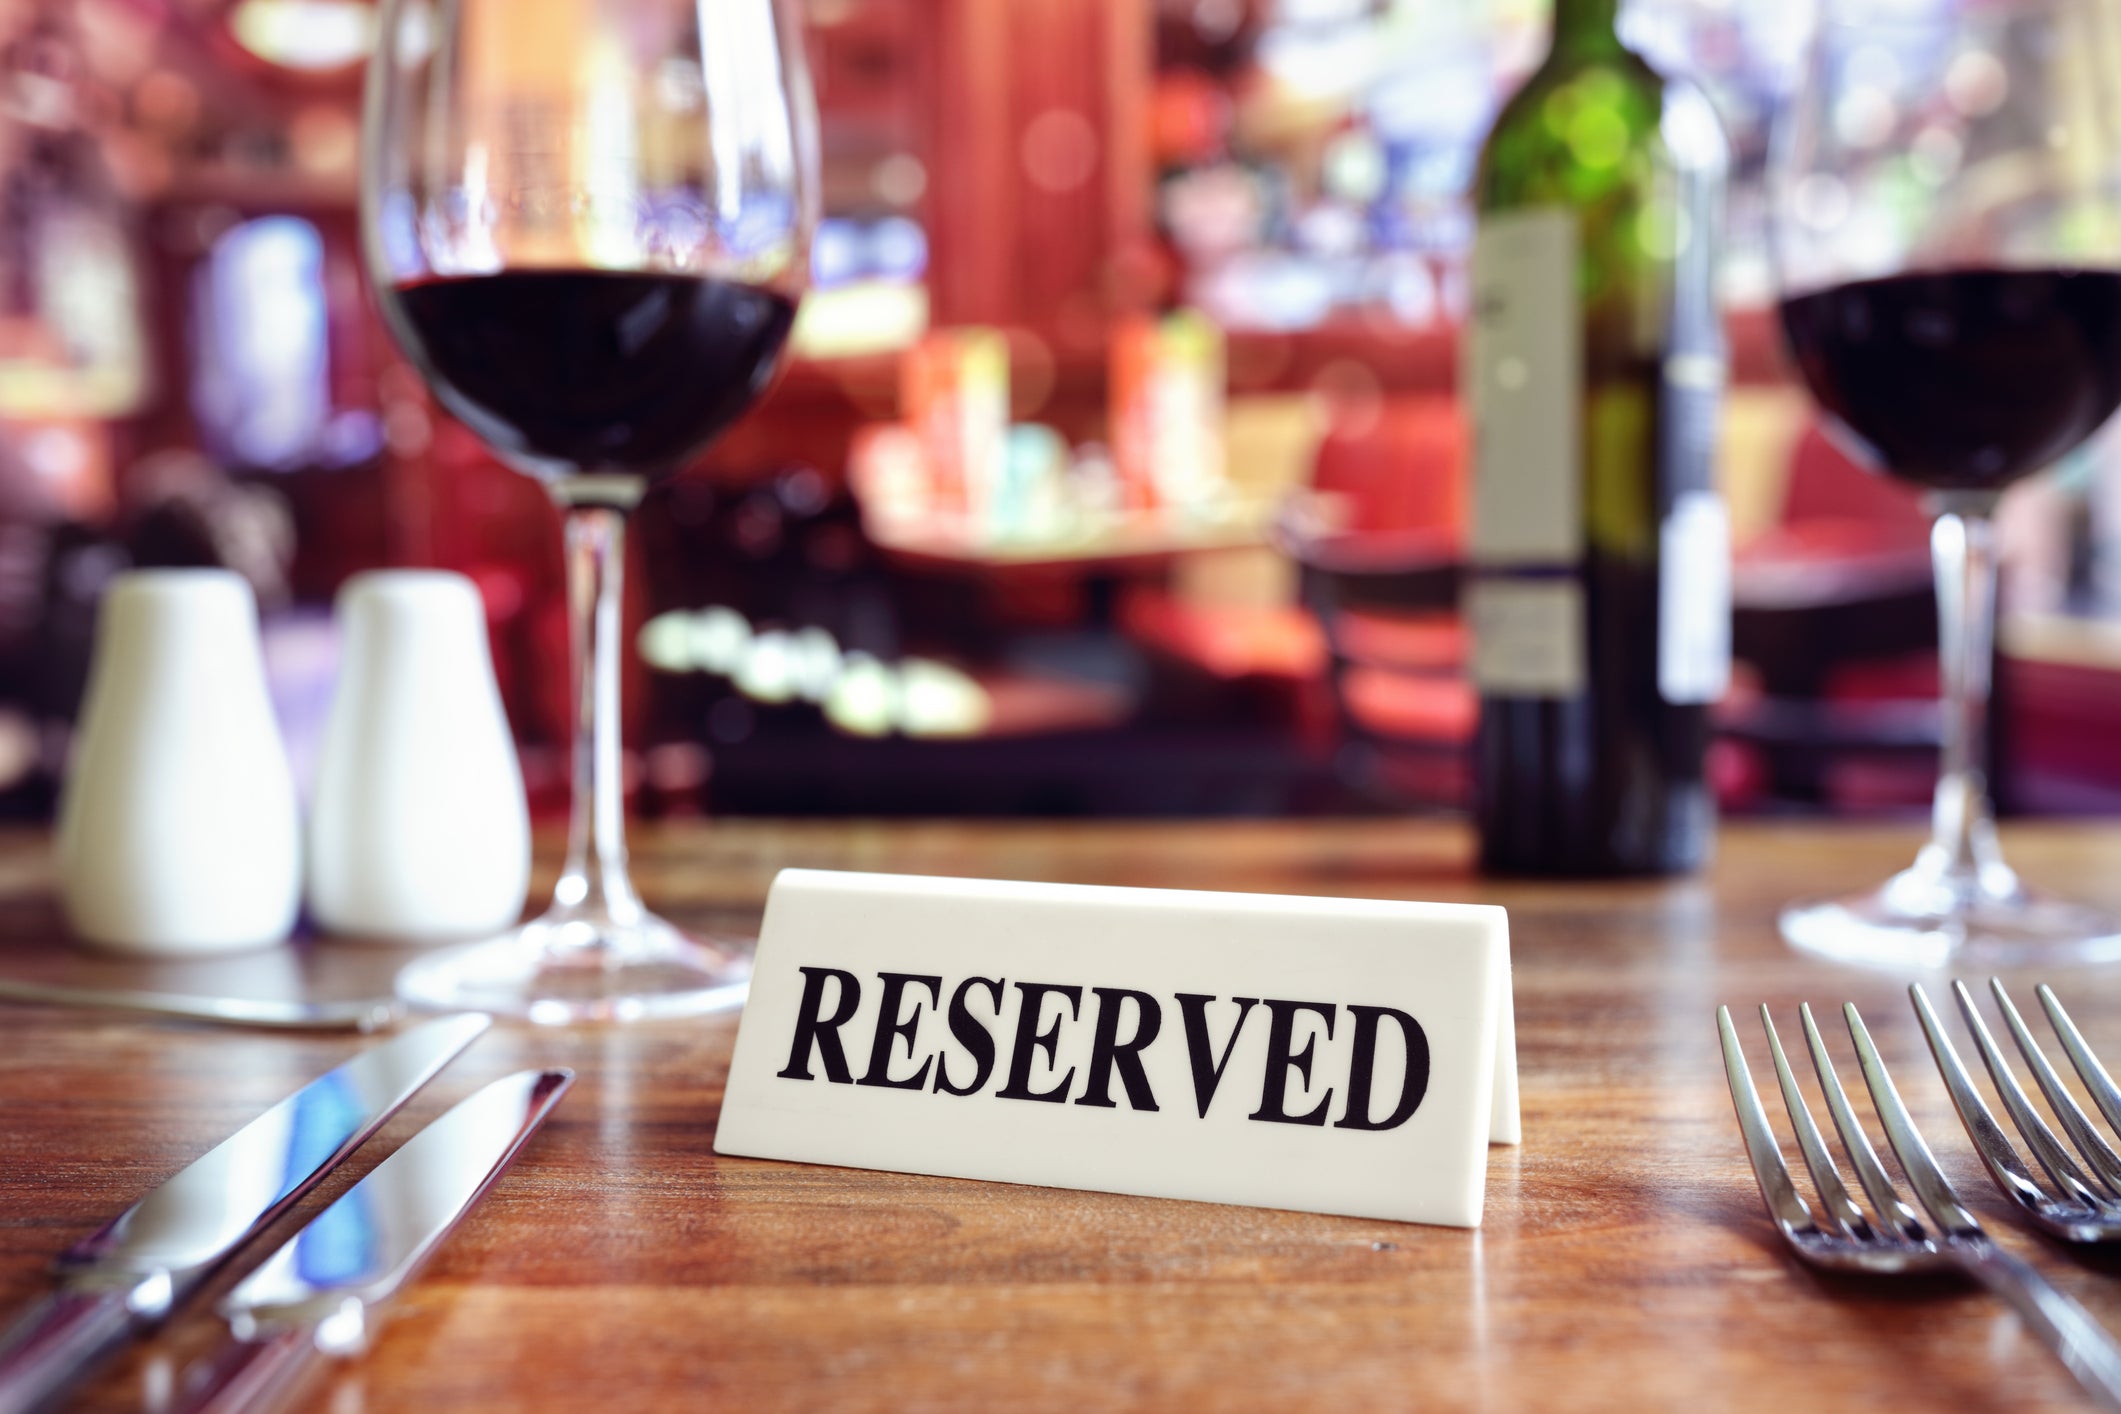 No-shows are costing the hospitality sector £17.6bn a year